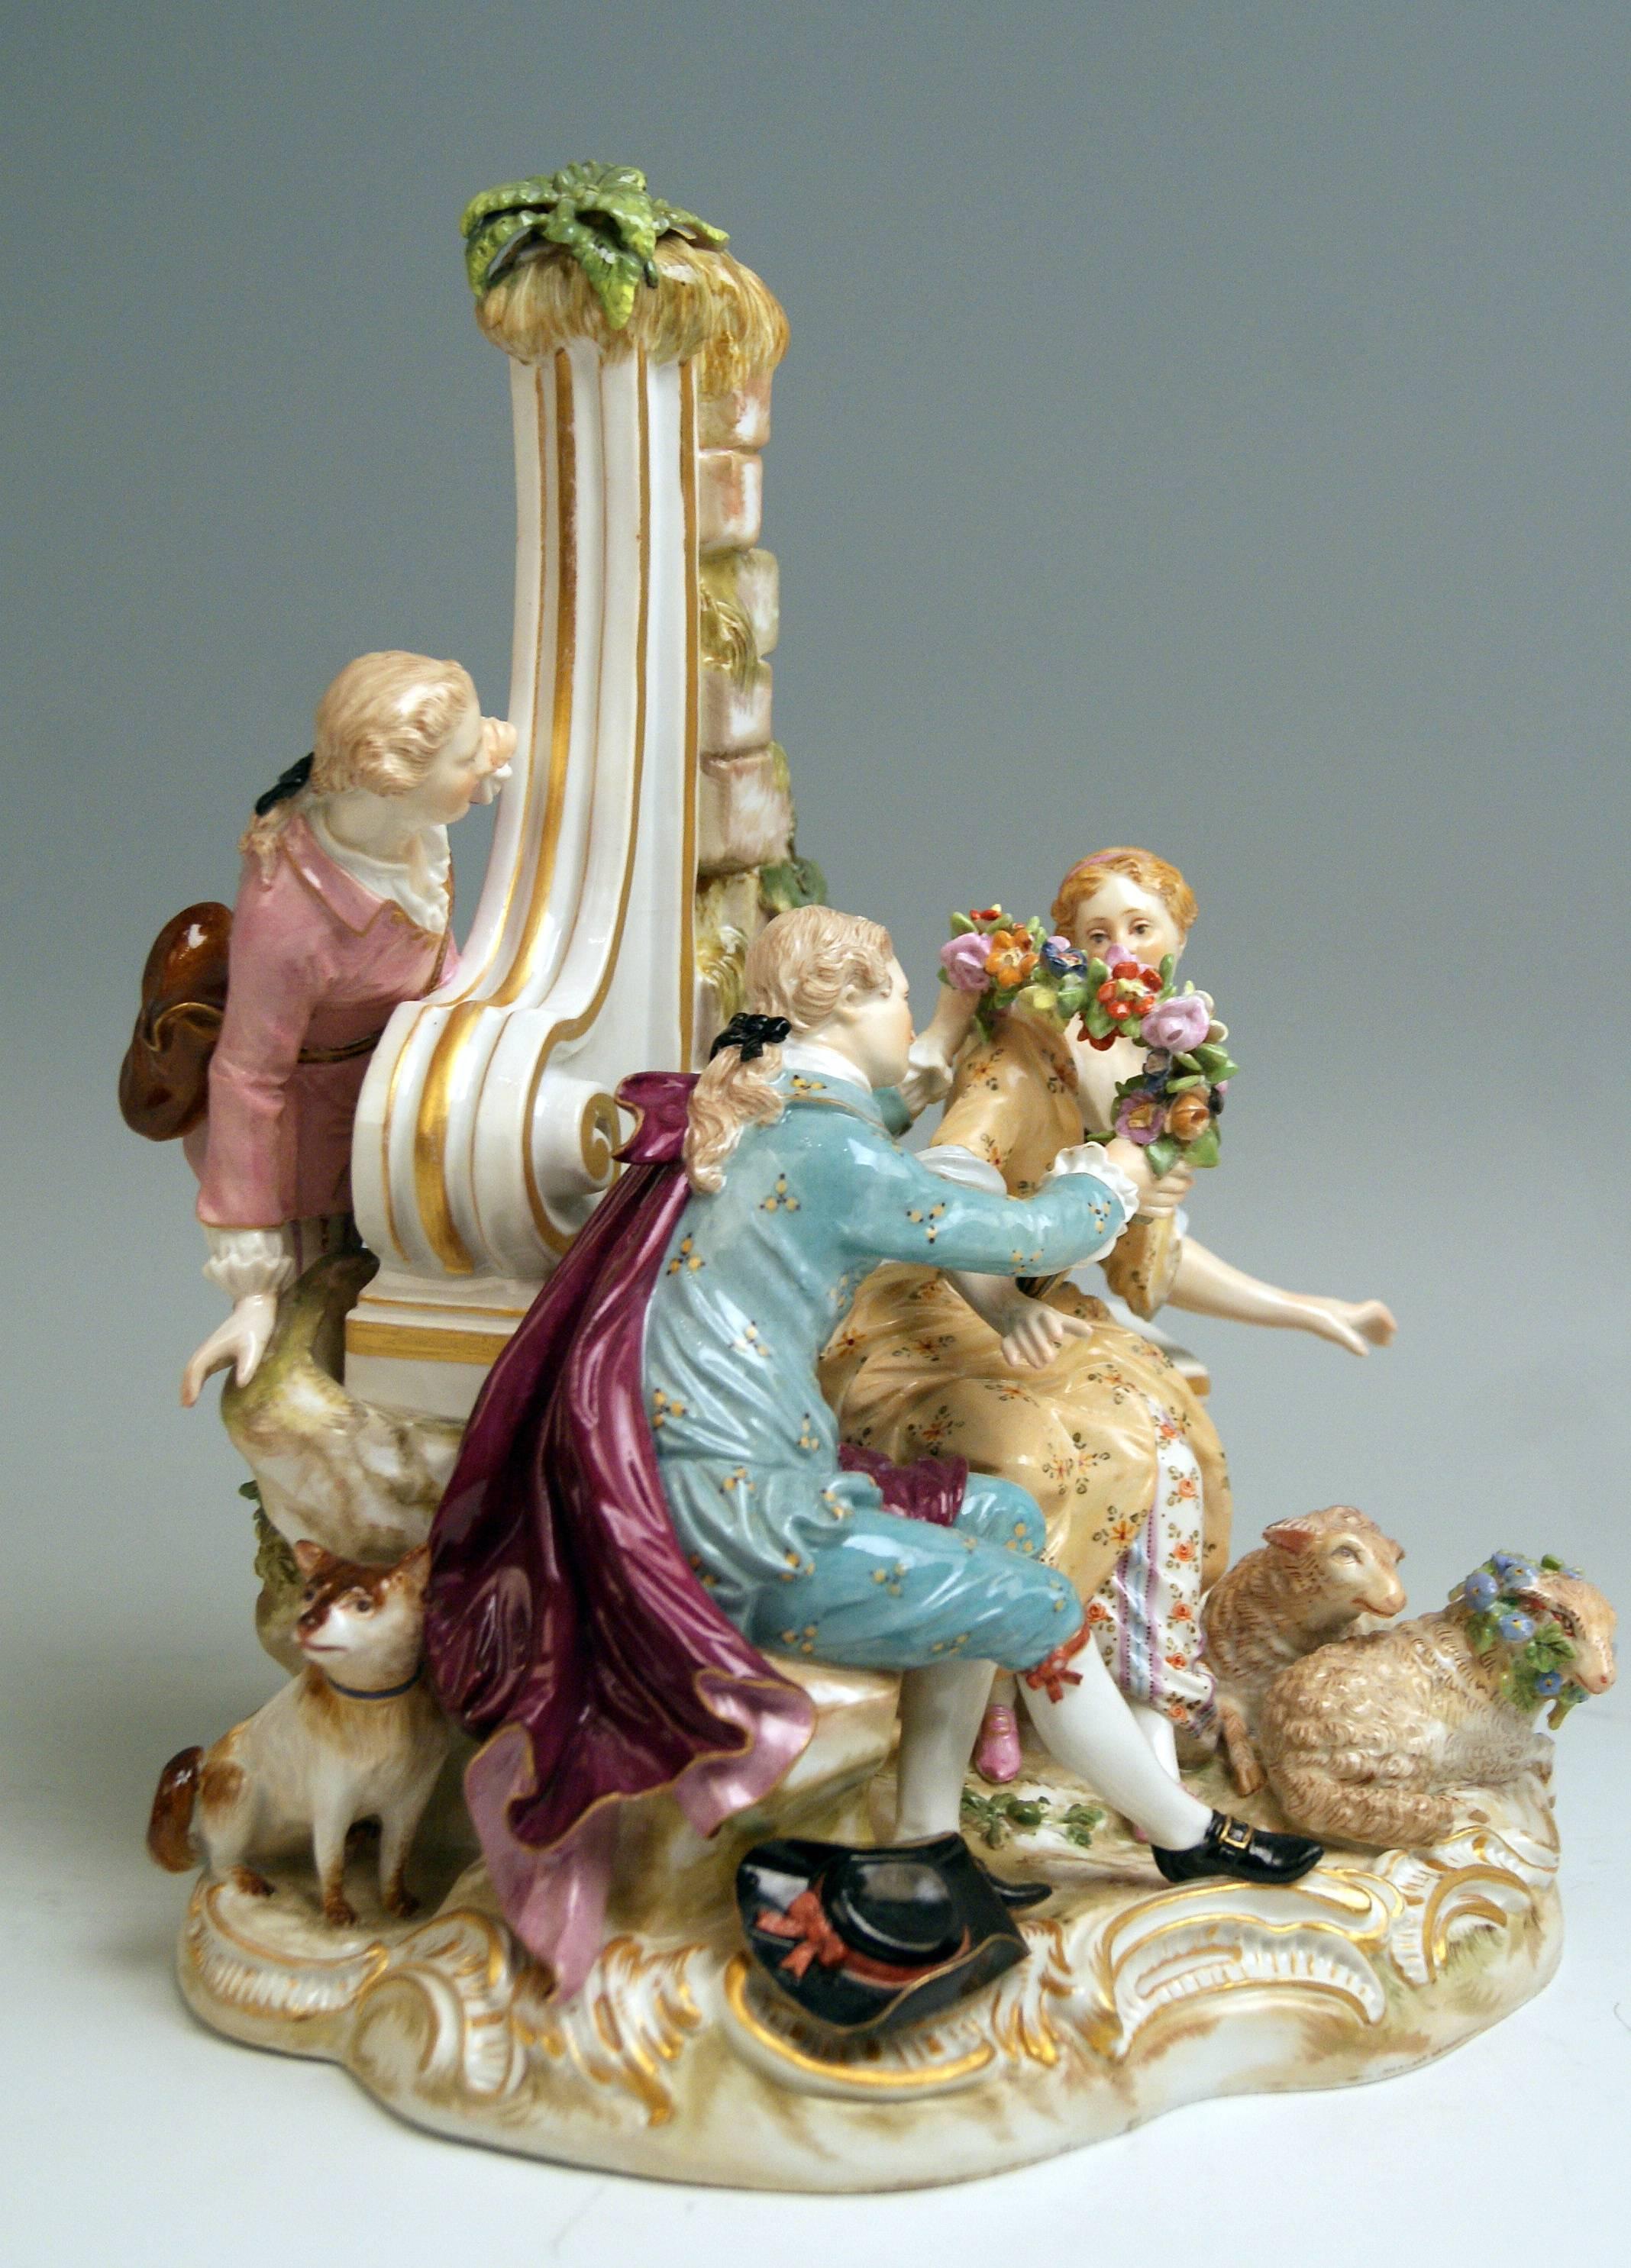 MEISSEN STUNNING FIGURINE GROUP: A COUPLE OF SHEPHERDS WATCHED BY A SCOUT

MEASURES:
height:  9.25   inches 
width:   7.28   inches
depth:   6.88   inches

Manufactory: Meissen
Hallmarked:  Blue Meissen Sword Mark  (glazed bottom)
model number  2870